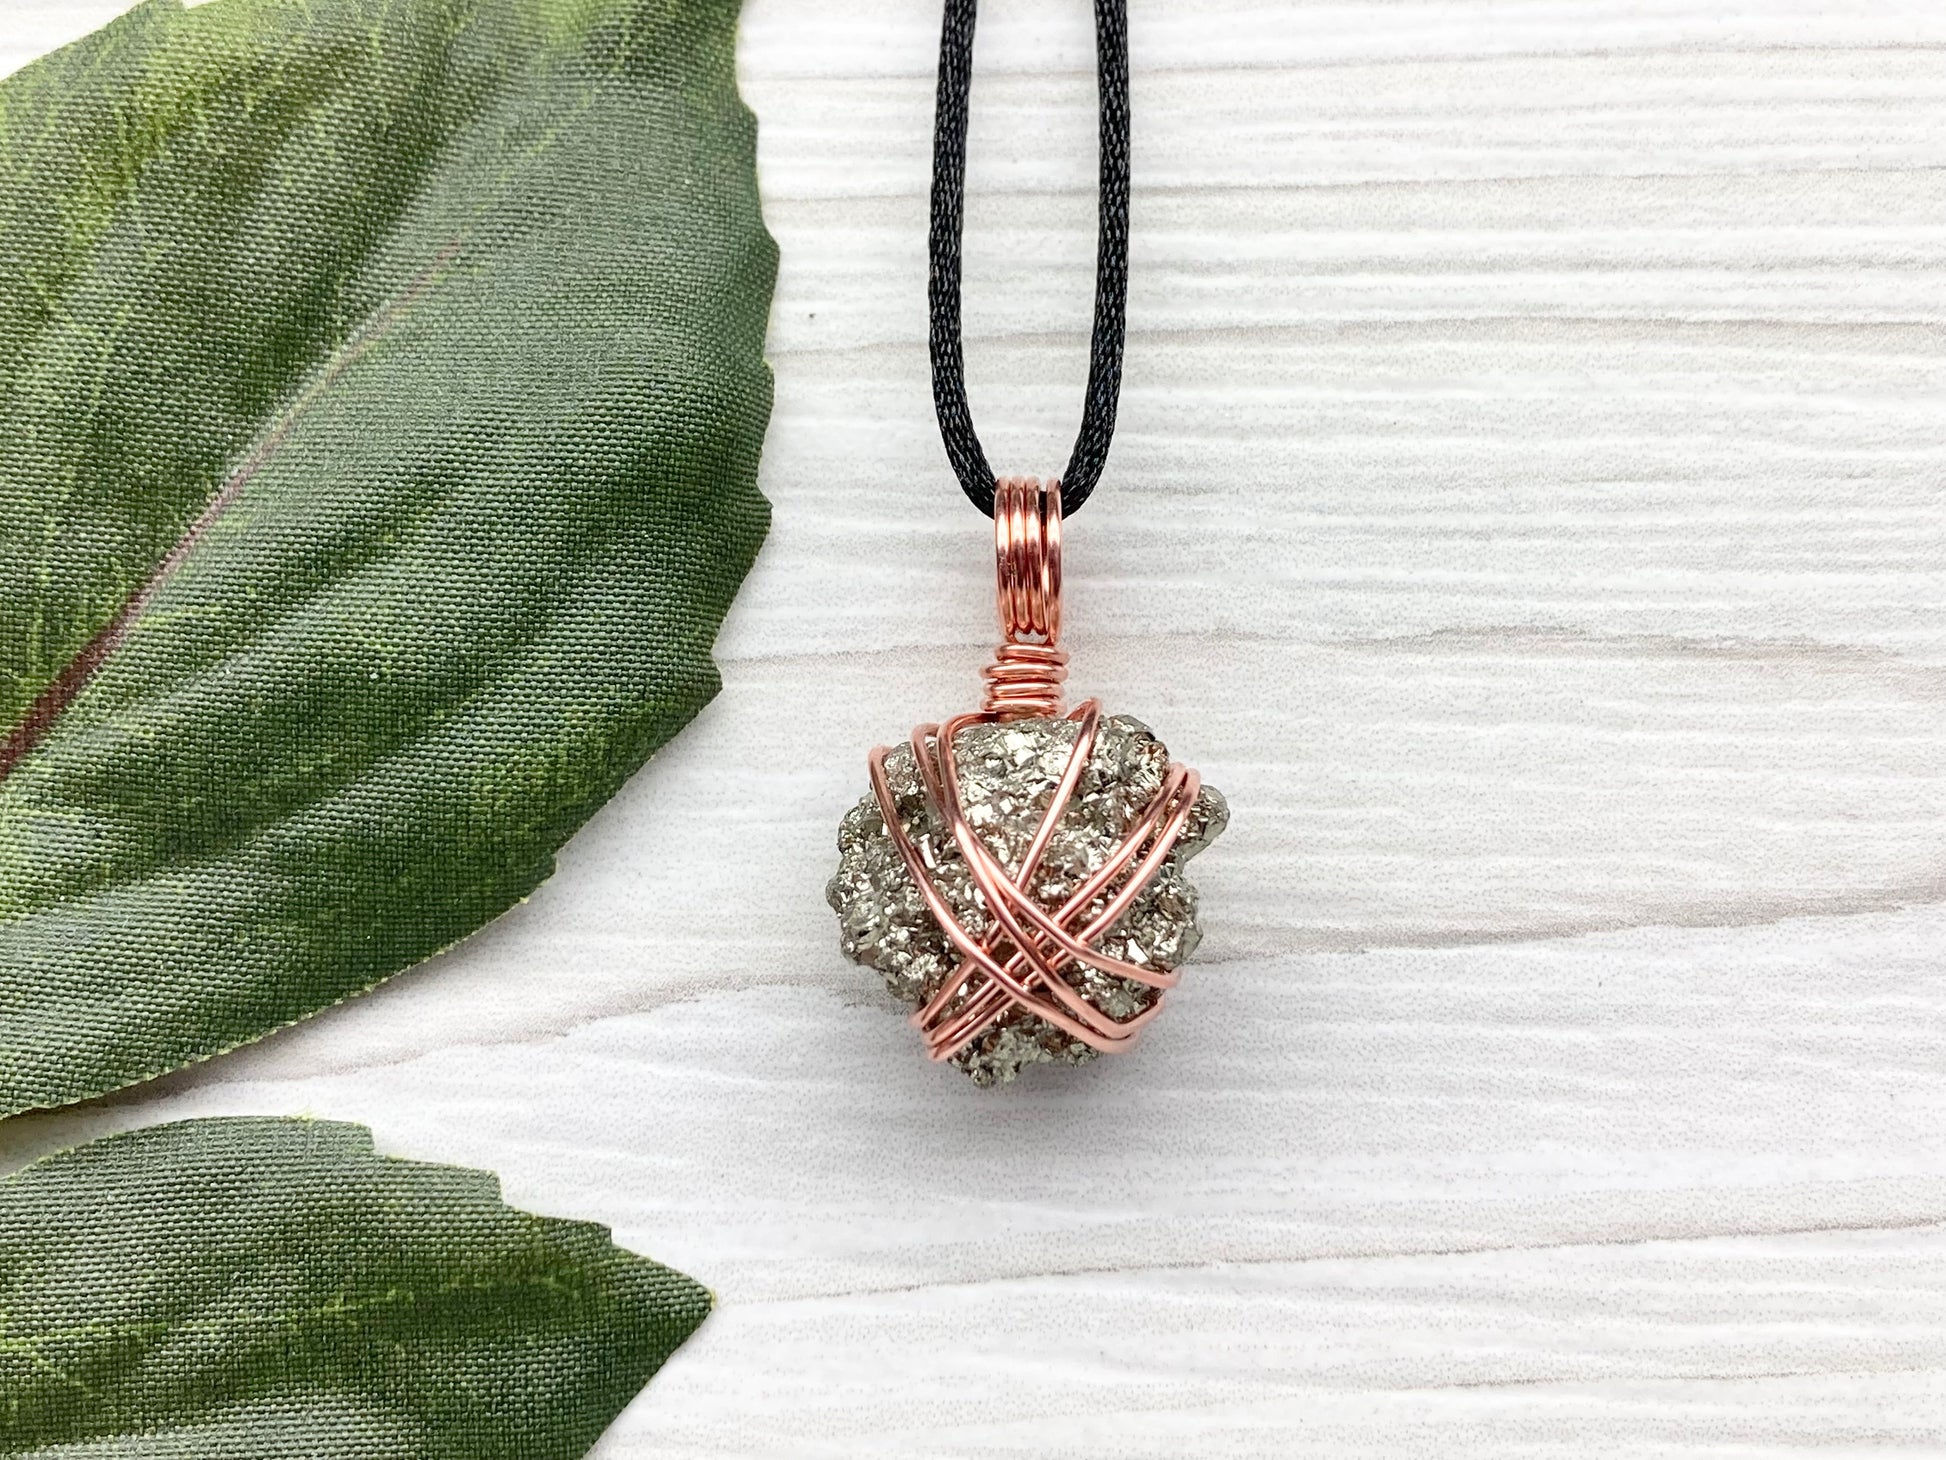 Raw Pyrite Necklace. Natural Pyrite Hand Wrapped With Copper Wire. Fools Gold Crystal Pendant. Comes On A Black Chain. Leo Zodiac Jewelry. Handmade In Tennessee.